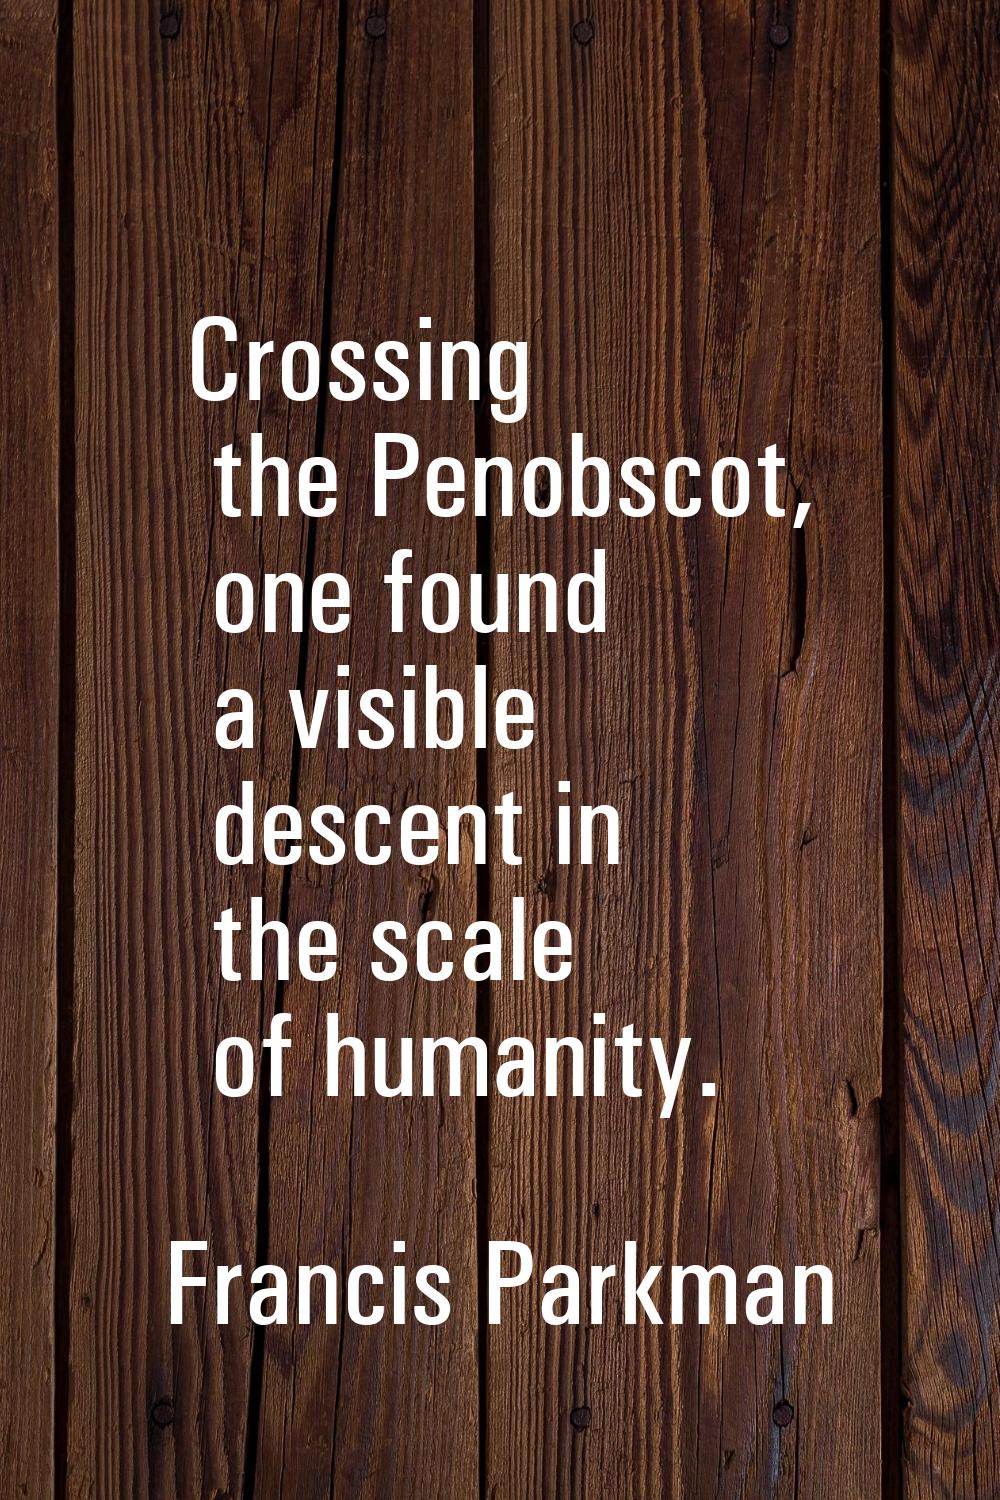 Crossing the Penobscot, one found a visible descent in the scale of humanity.